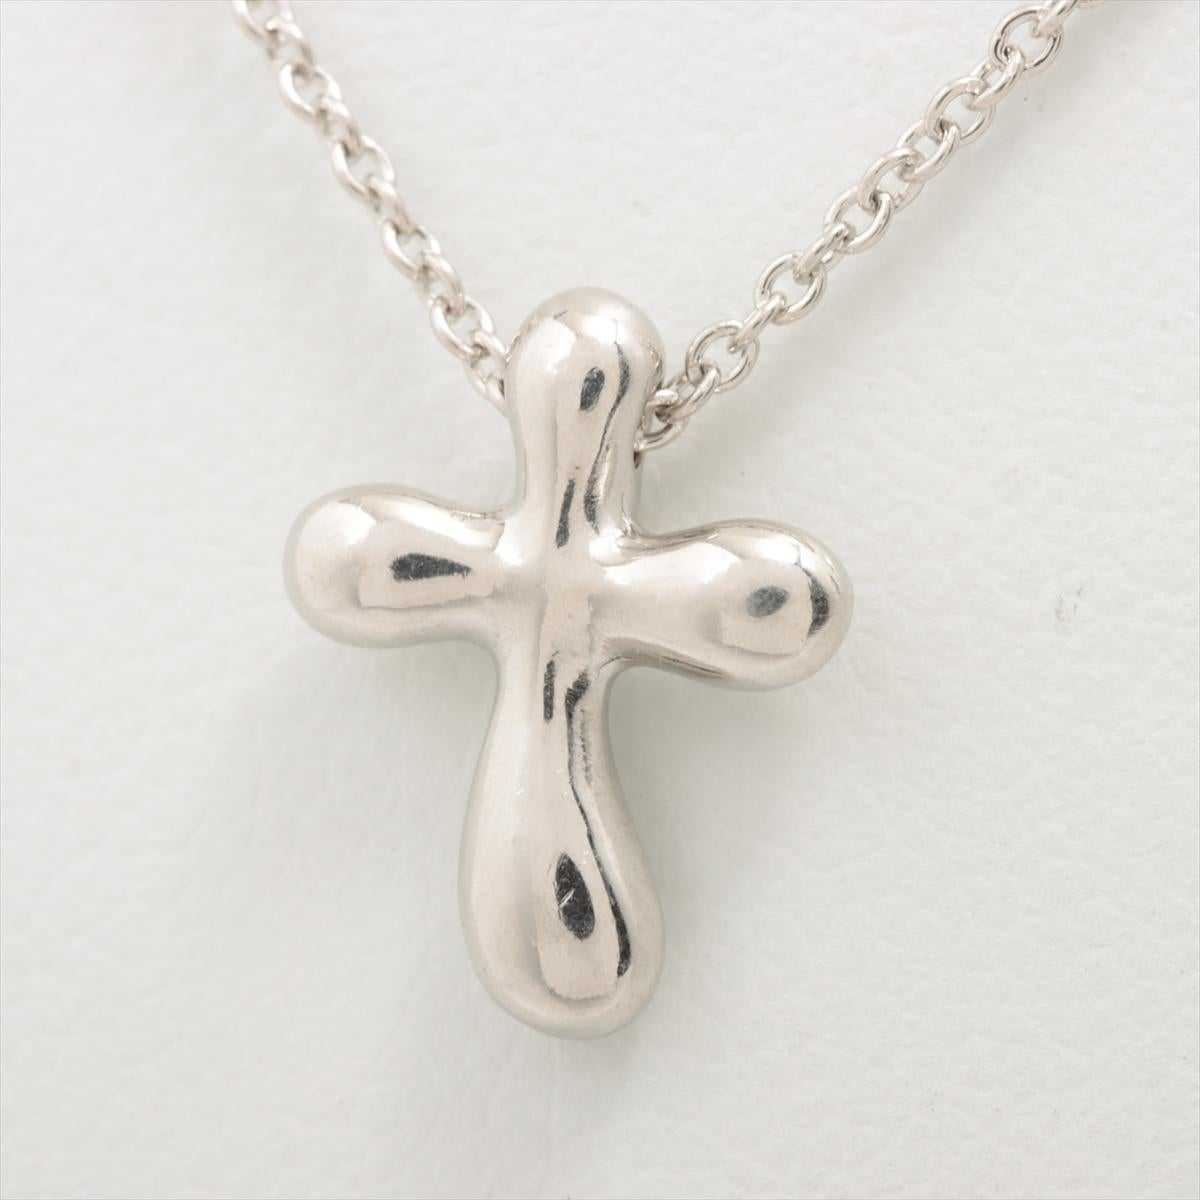 Tiffany & Co.Small Cross Pendant Necklace Platinum In Good Condition For Sale In Indianapolis, IN